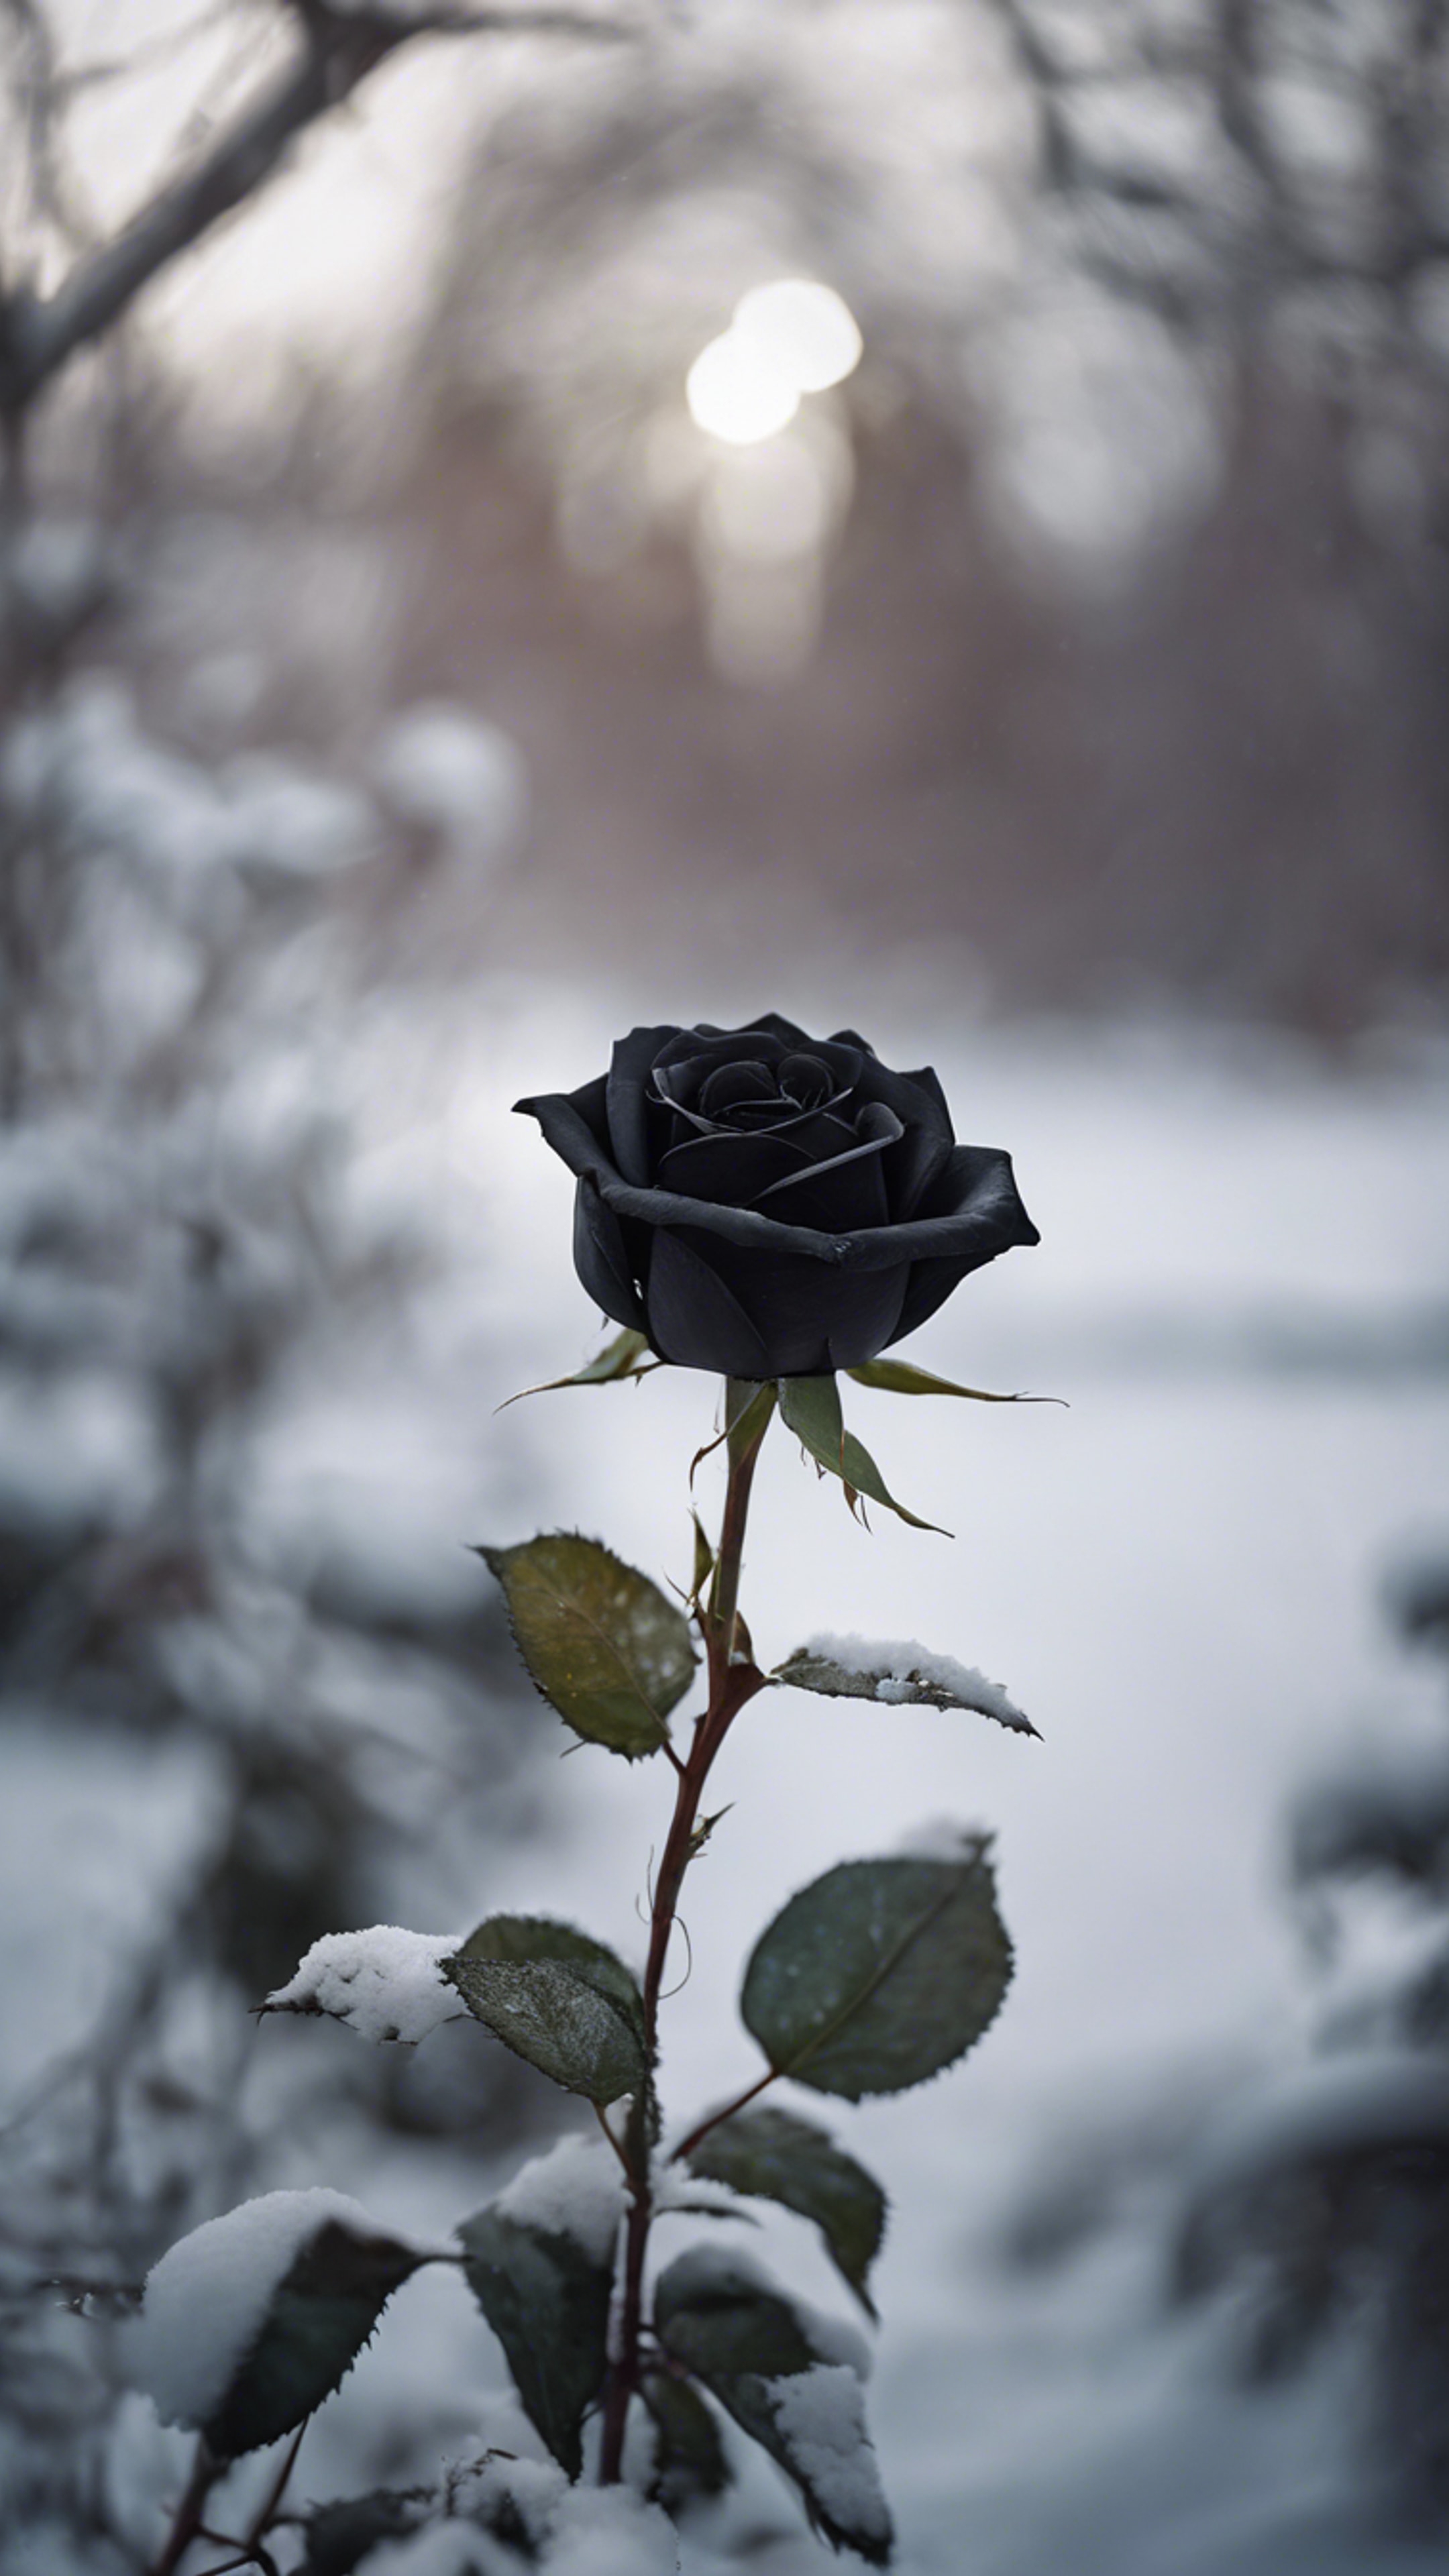 A single, dramatic black rose blooming against the stark backdrop of a snow-covered garden. Kertas dinding[12d80e94a68945fa833e]